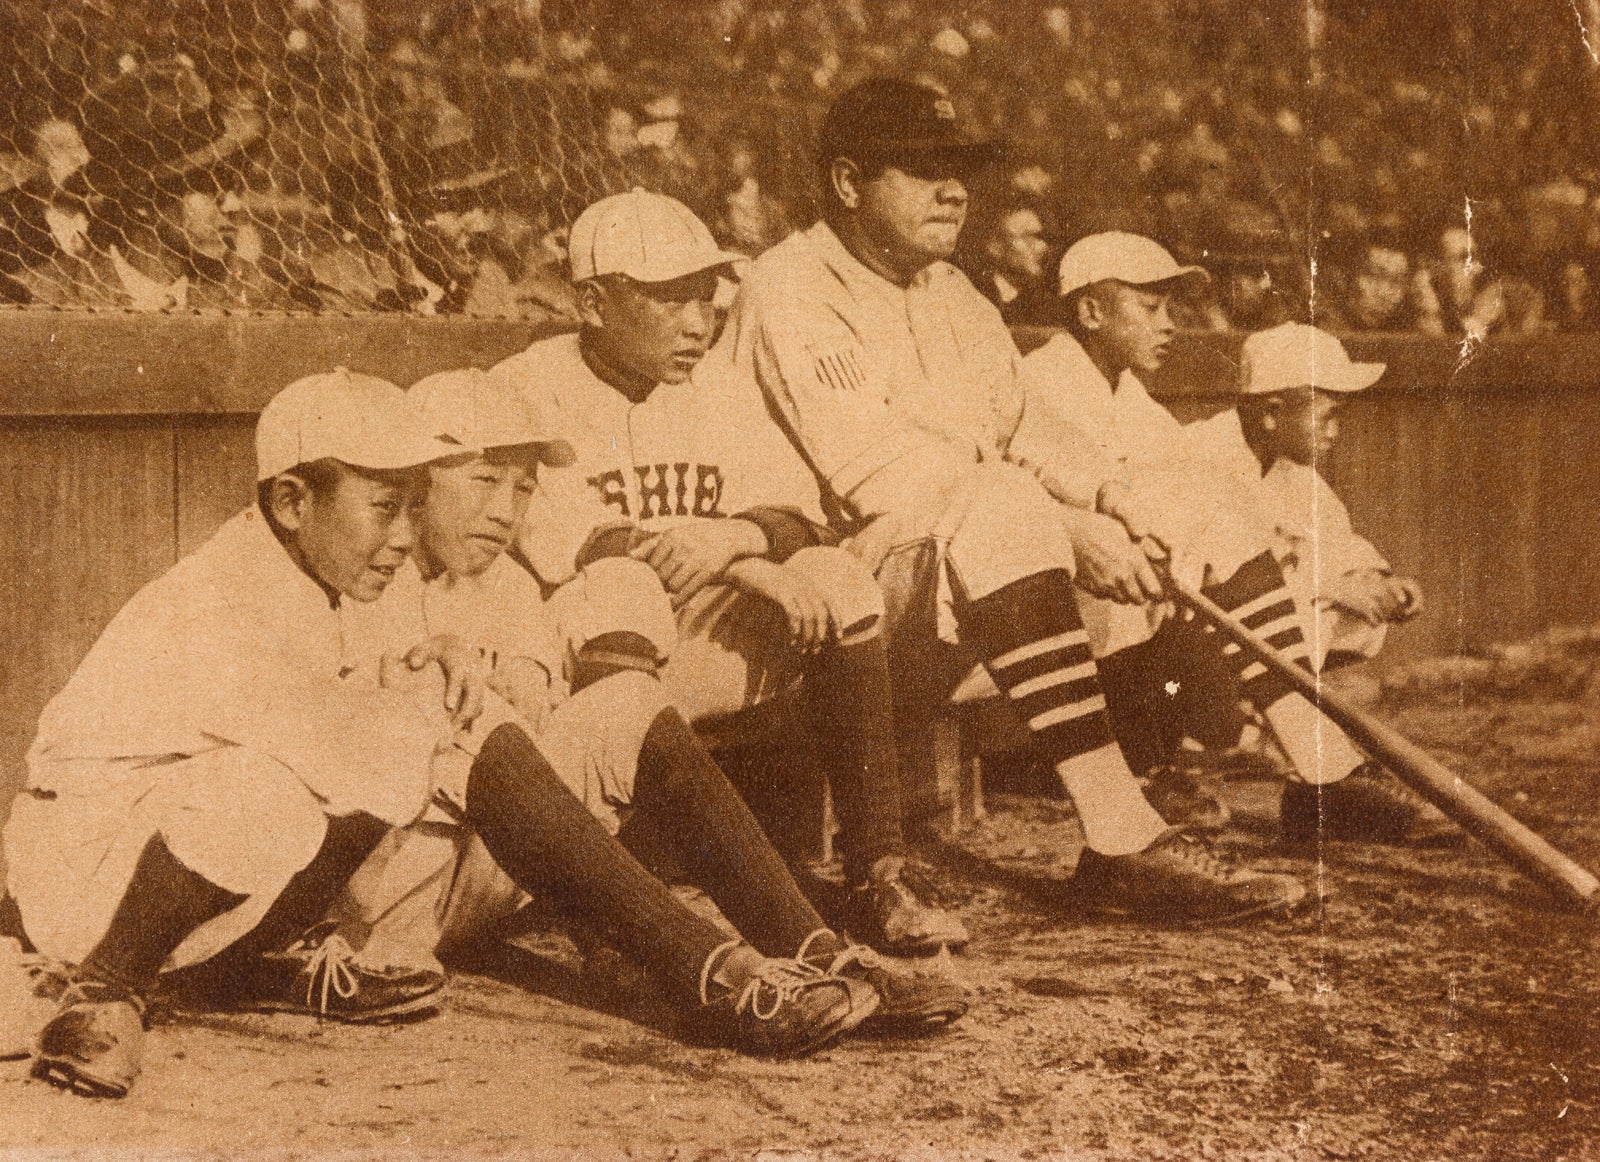 Babe Ruth with Japanese ball players during the 1934 World Tour